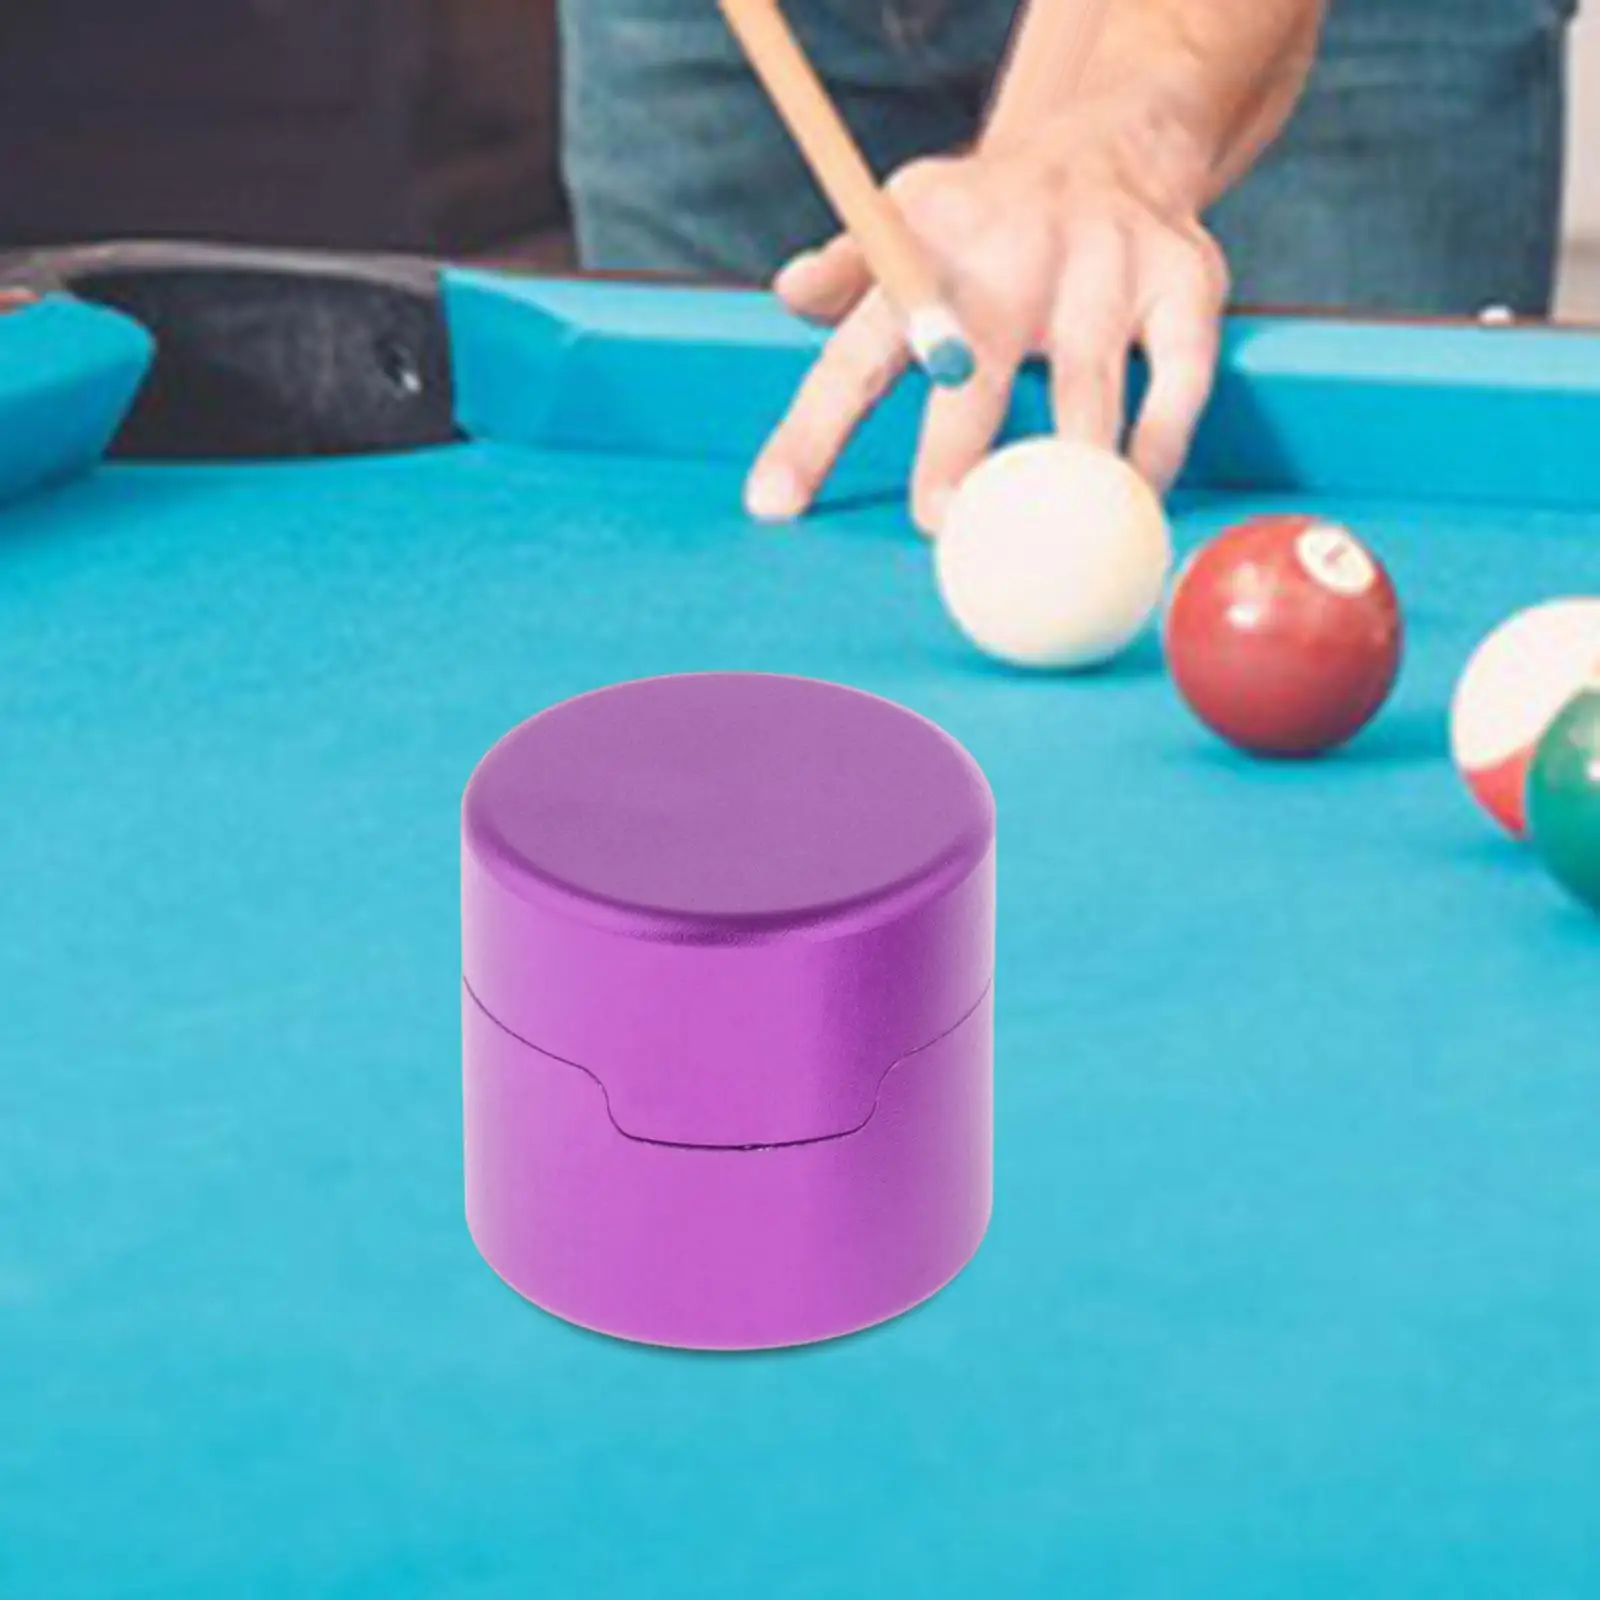 Pool Cue Chalk Holder Snooker Accessories Cup Round Shaped Portable Container